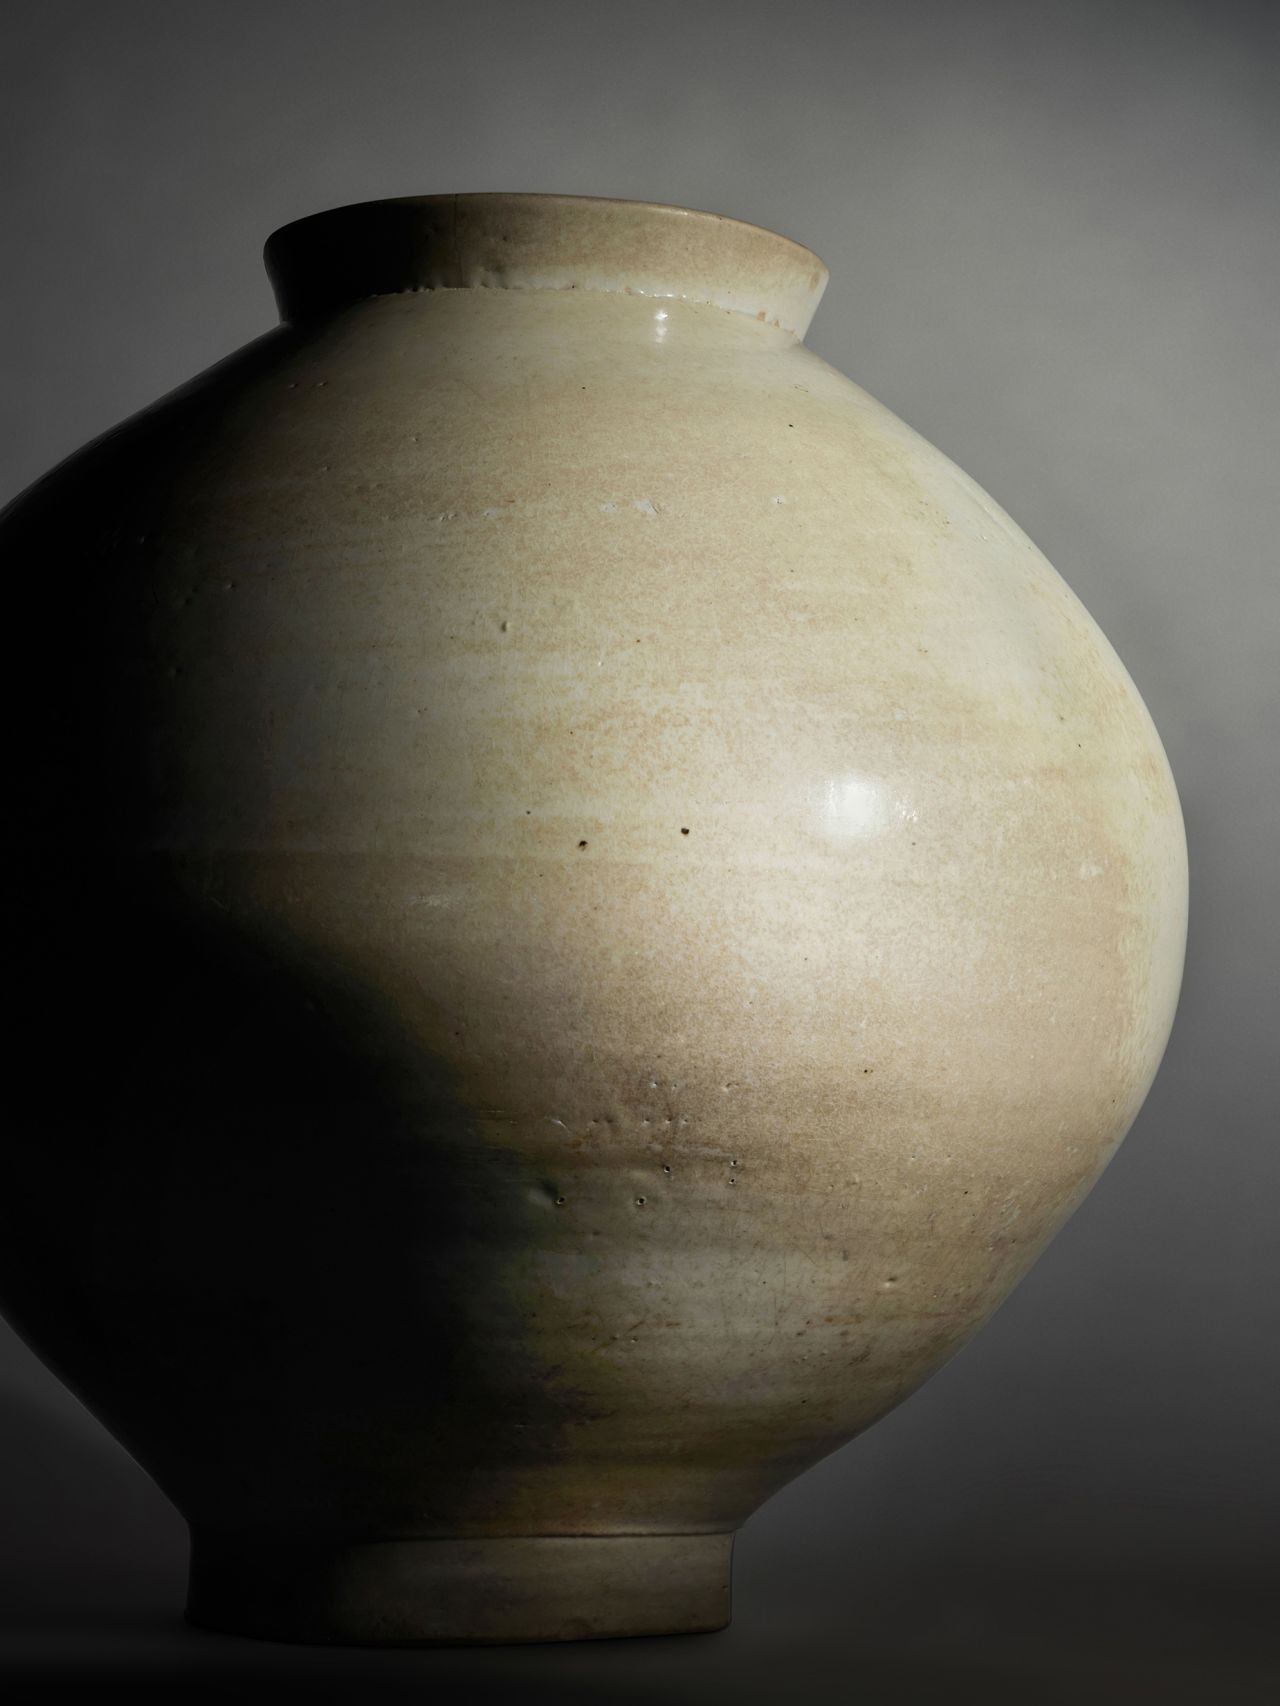 Sotheby's is auctioning this moon jar, which it expects to fetch in excess of $3 million, later this month.